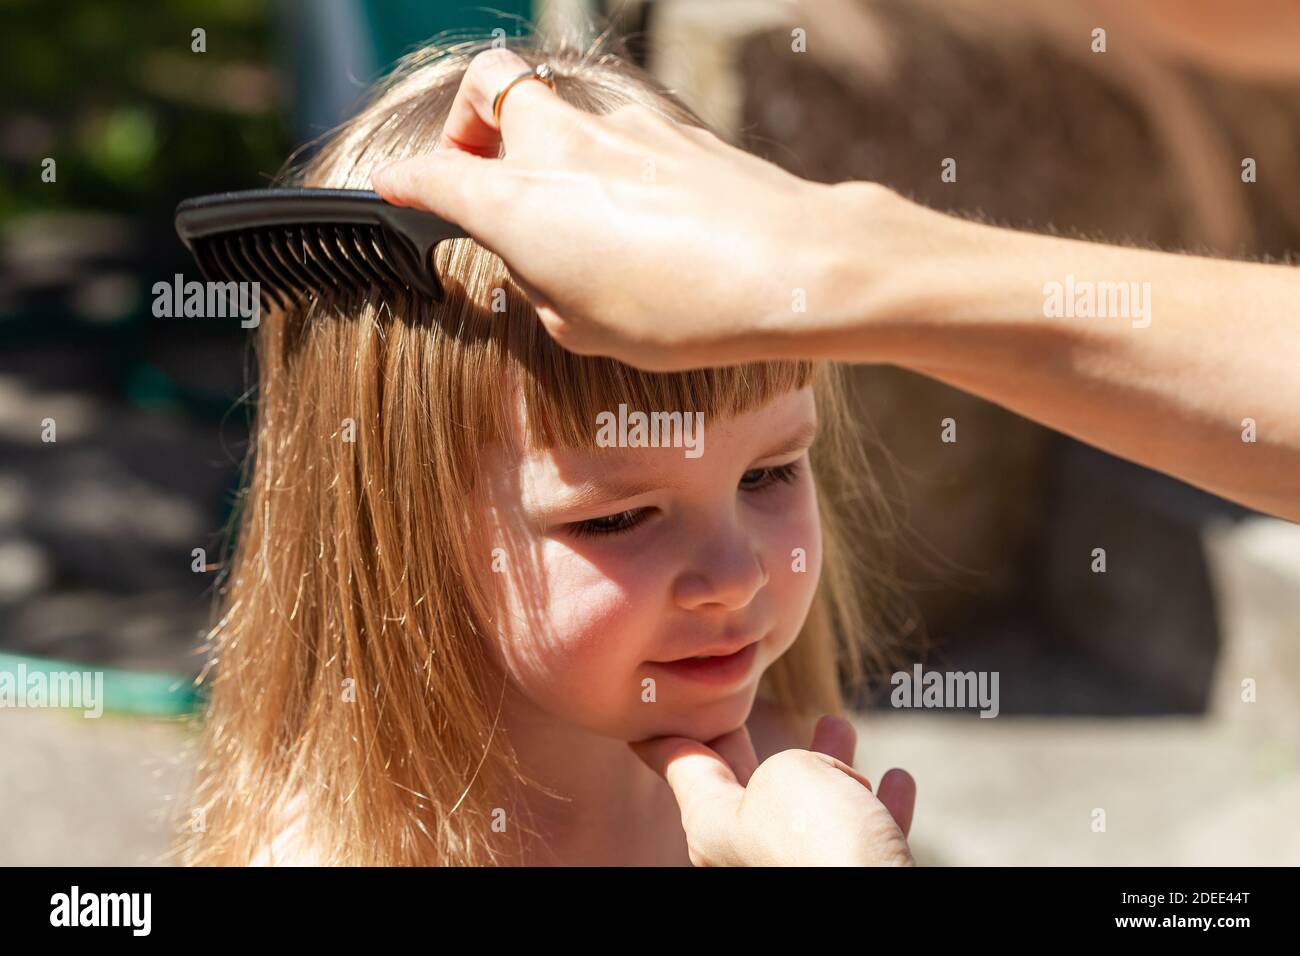 Mother combing her daughters hair, child being combed by her mom using a black comb, closeup, portrait. Woman doing happy little girls hair, outdoors Stock Photo